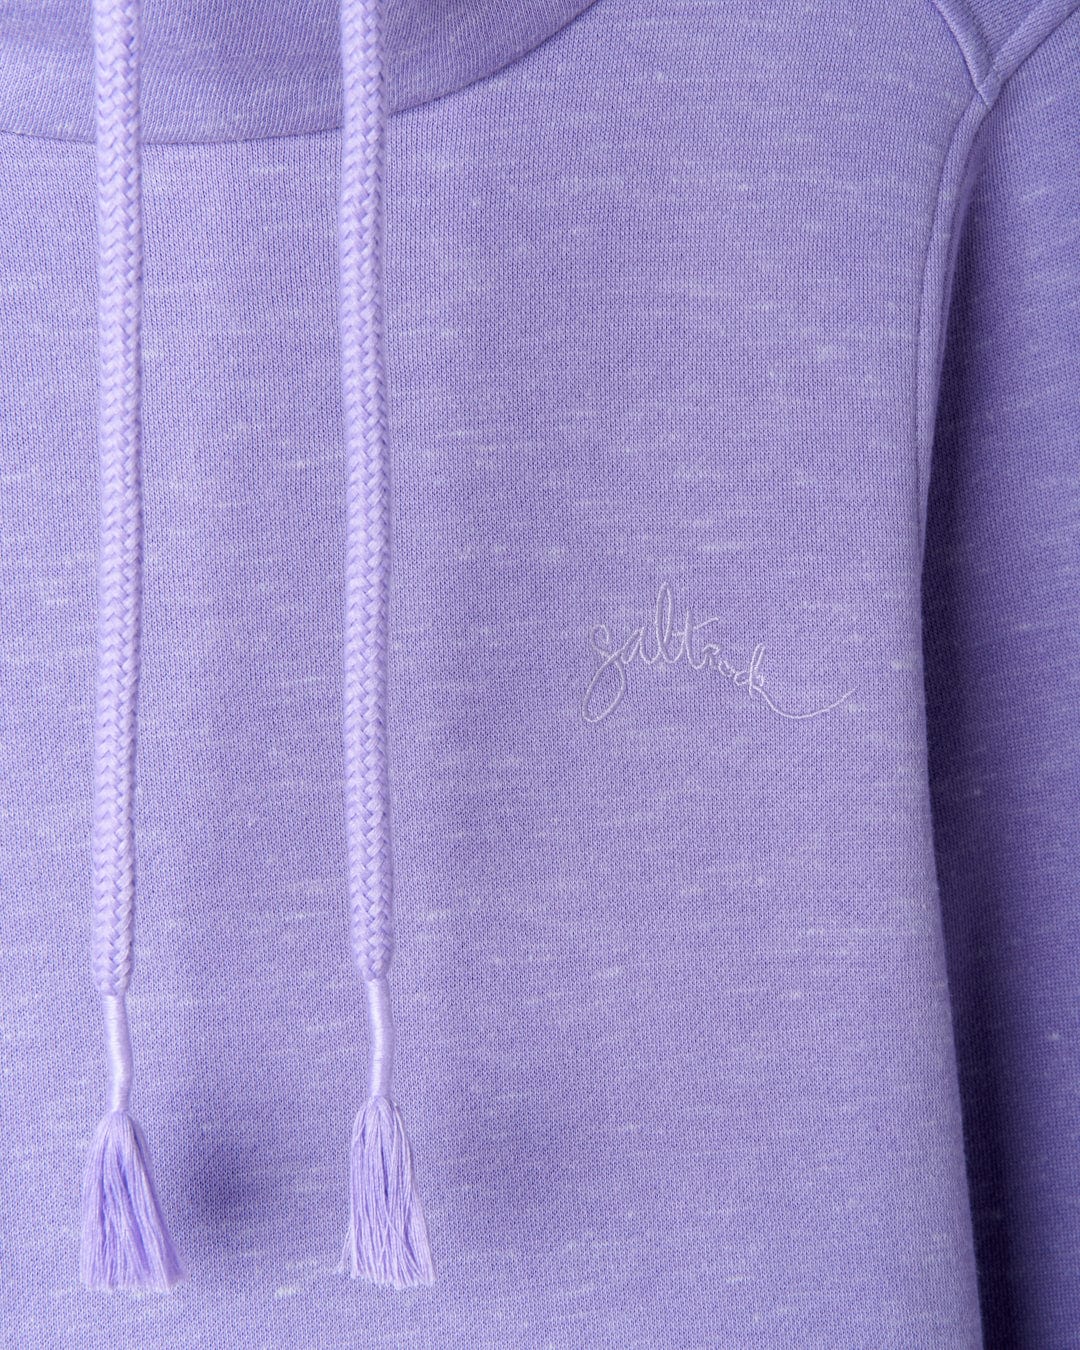 A close up of a lilac Saltrock Harper Womens Longline Pop Sweat hoodie with tassels, embroidered branding, and longline design.